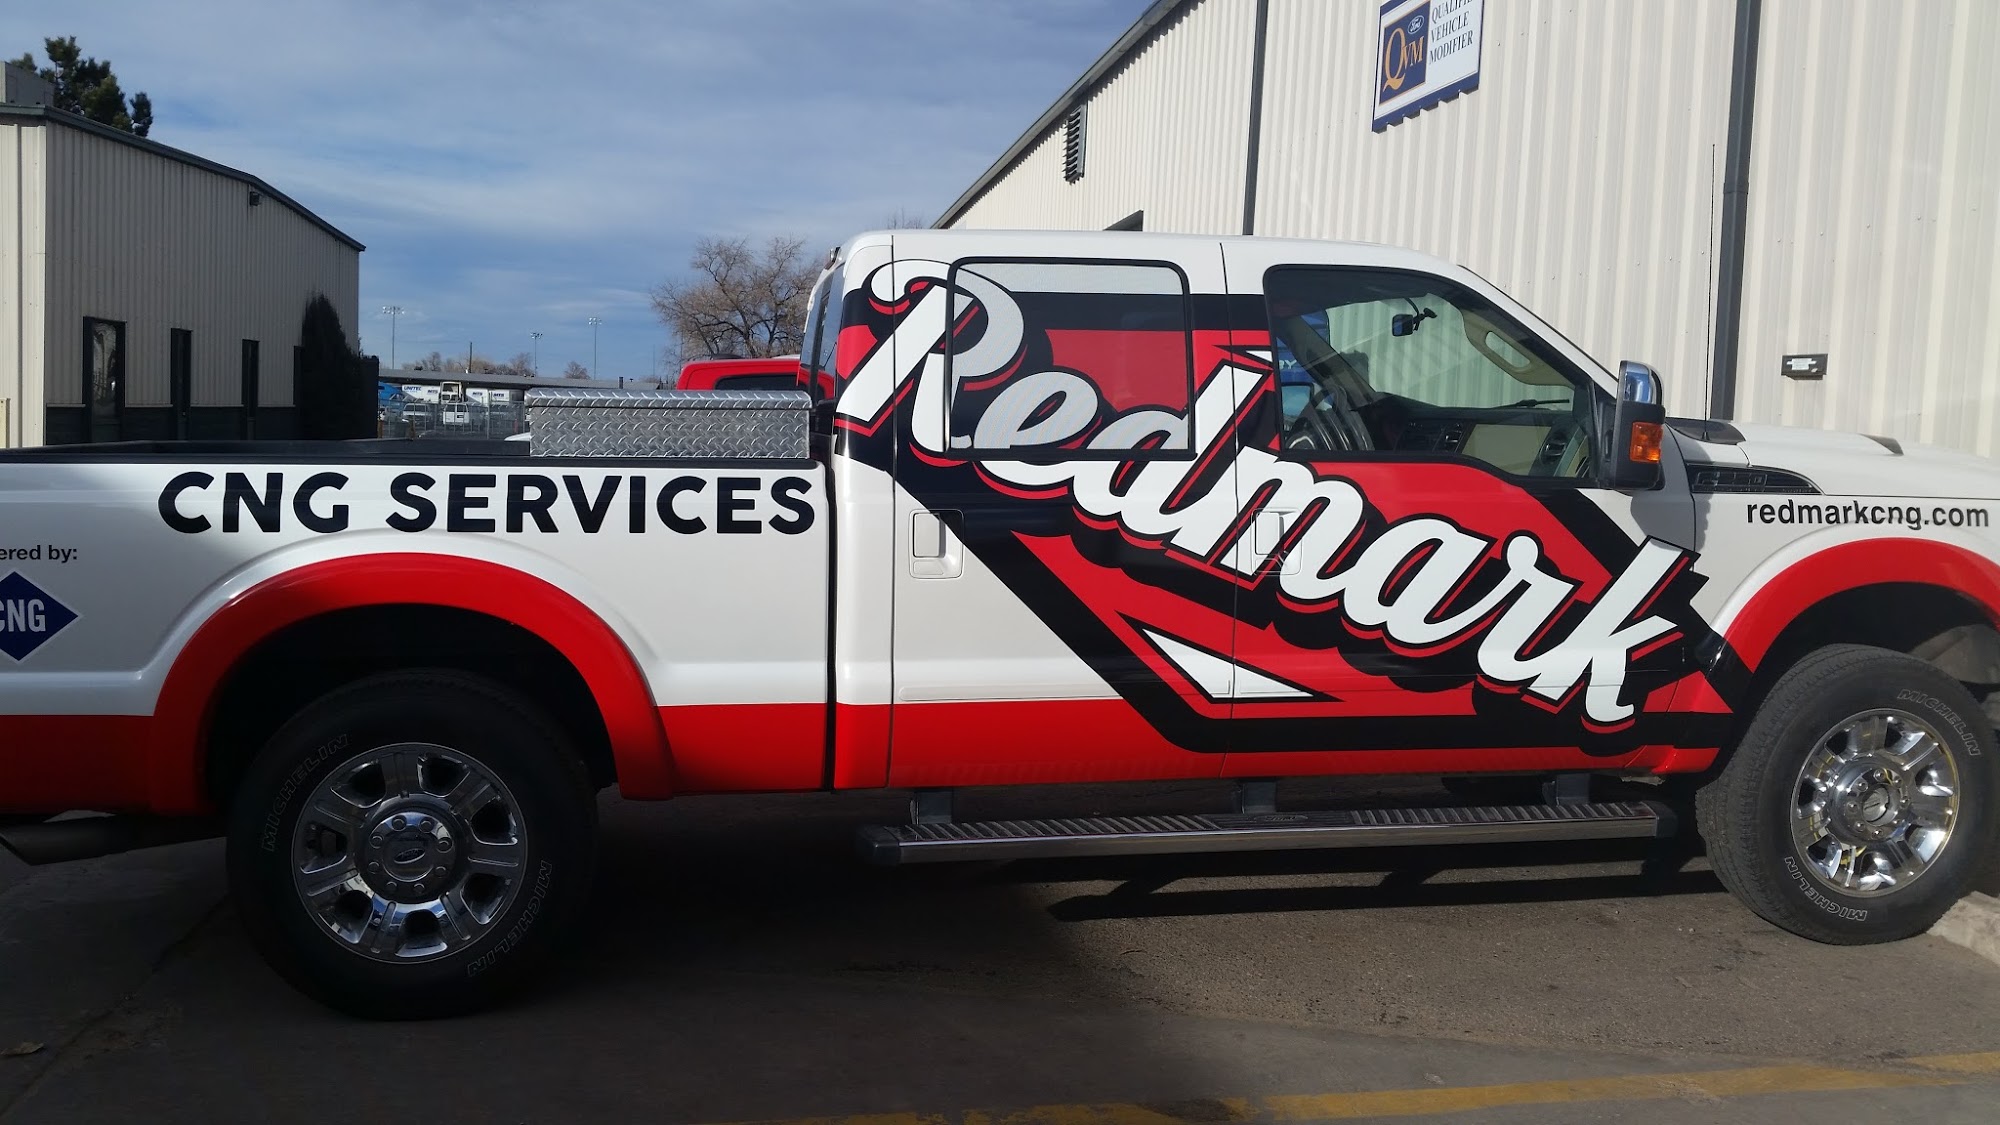 Redmark CNG Services